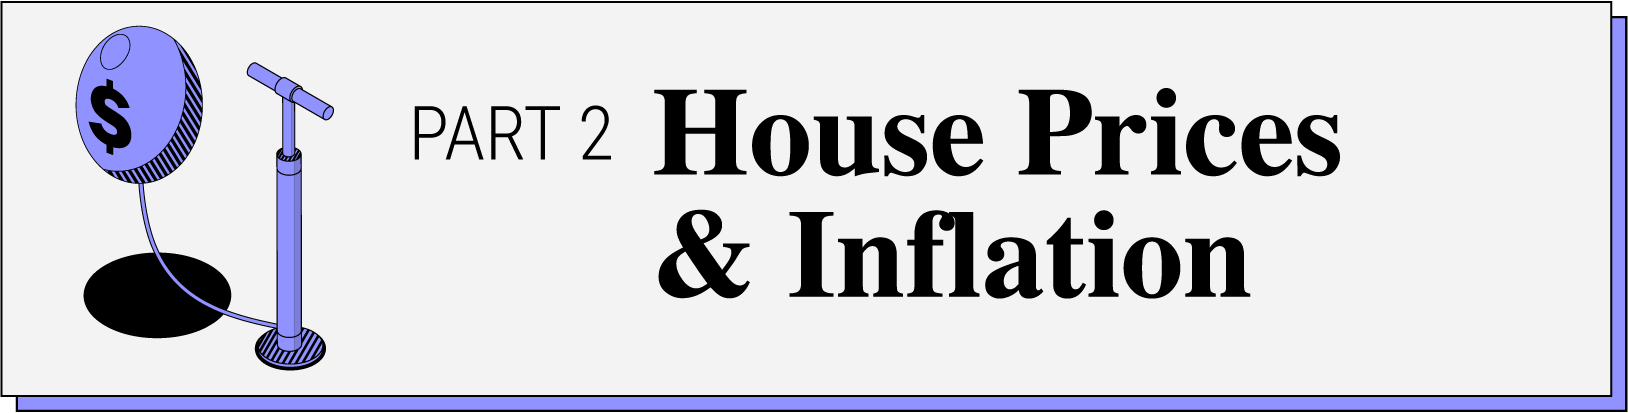 Housing Prices and Inflation Part 2 of 3